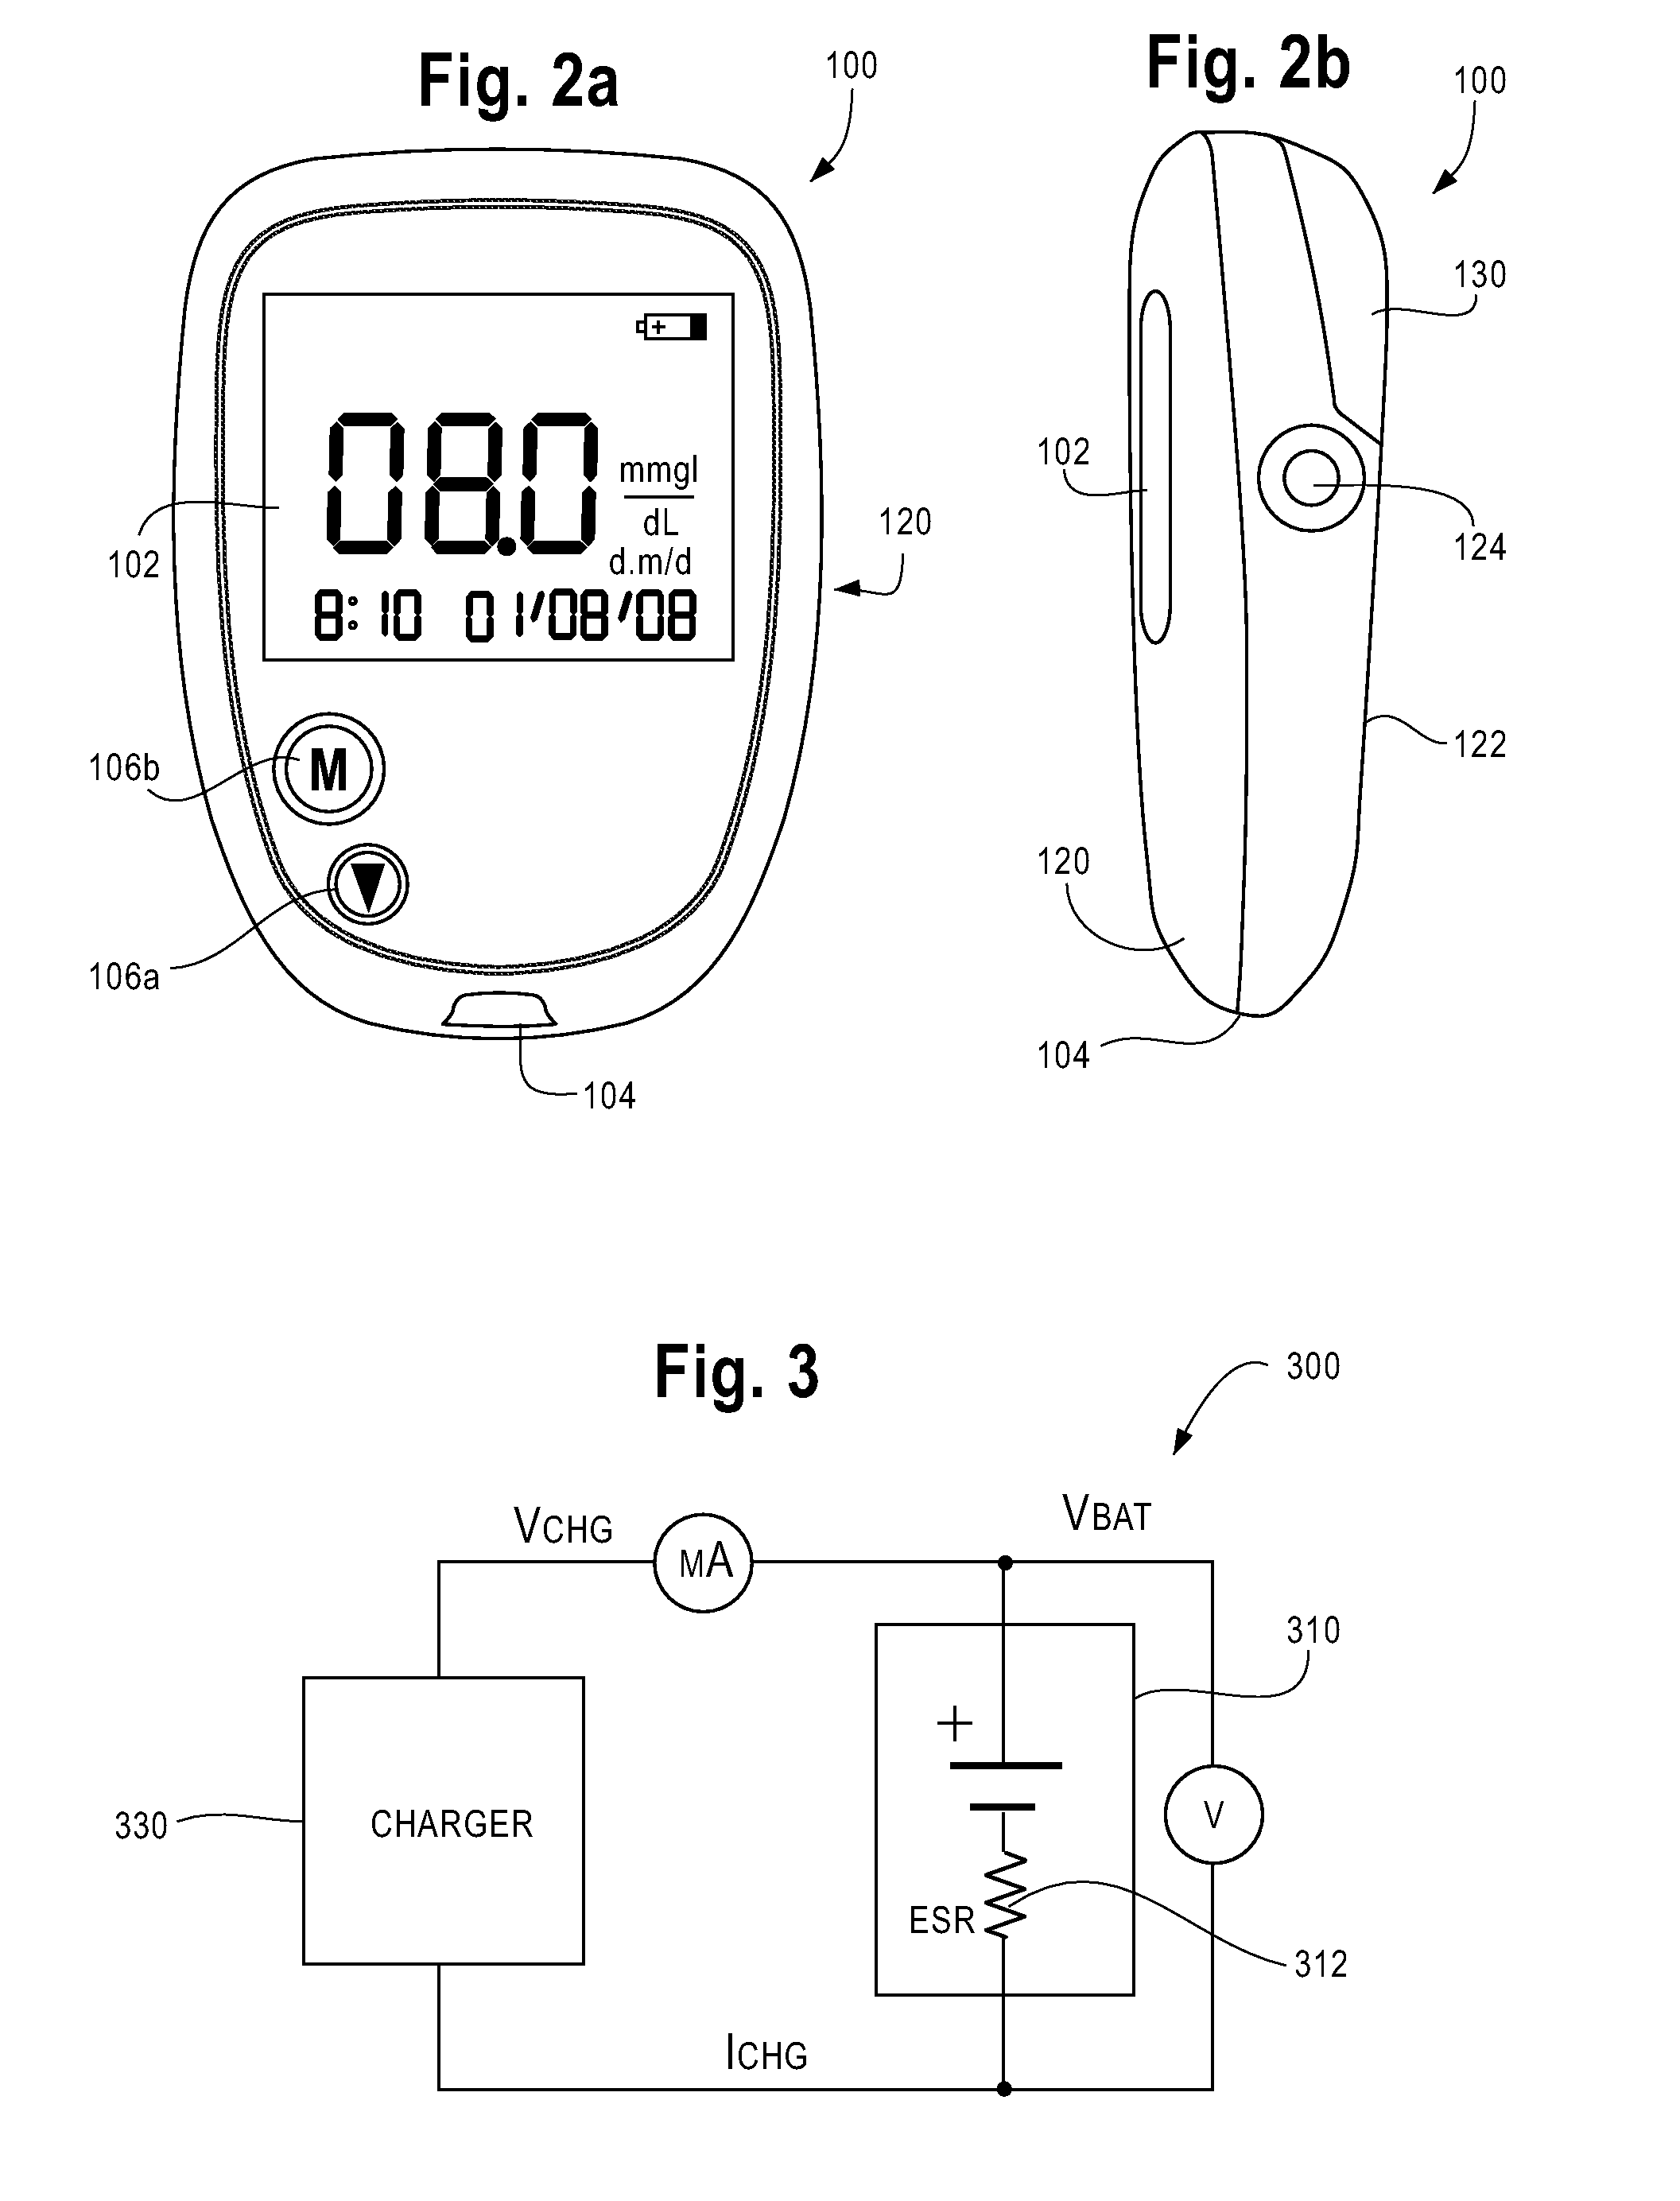 Rapid Charging And Power Management Of A Battery-Powered Fluid Analyte Meter